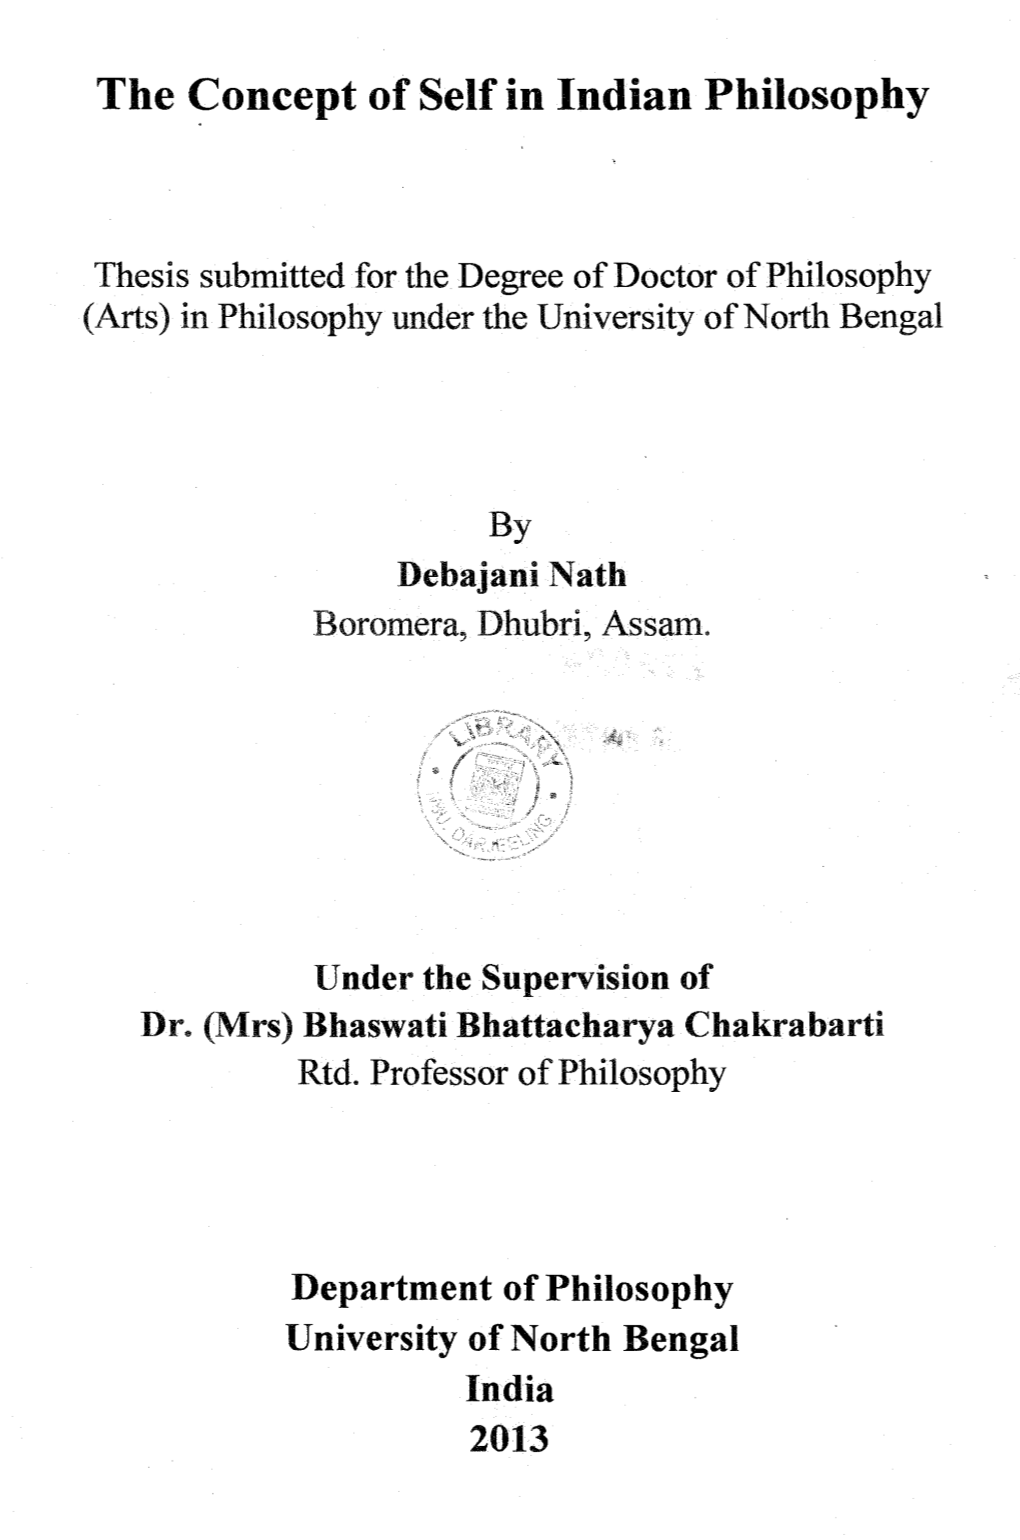 The Concept of Self in Indian Philosophy